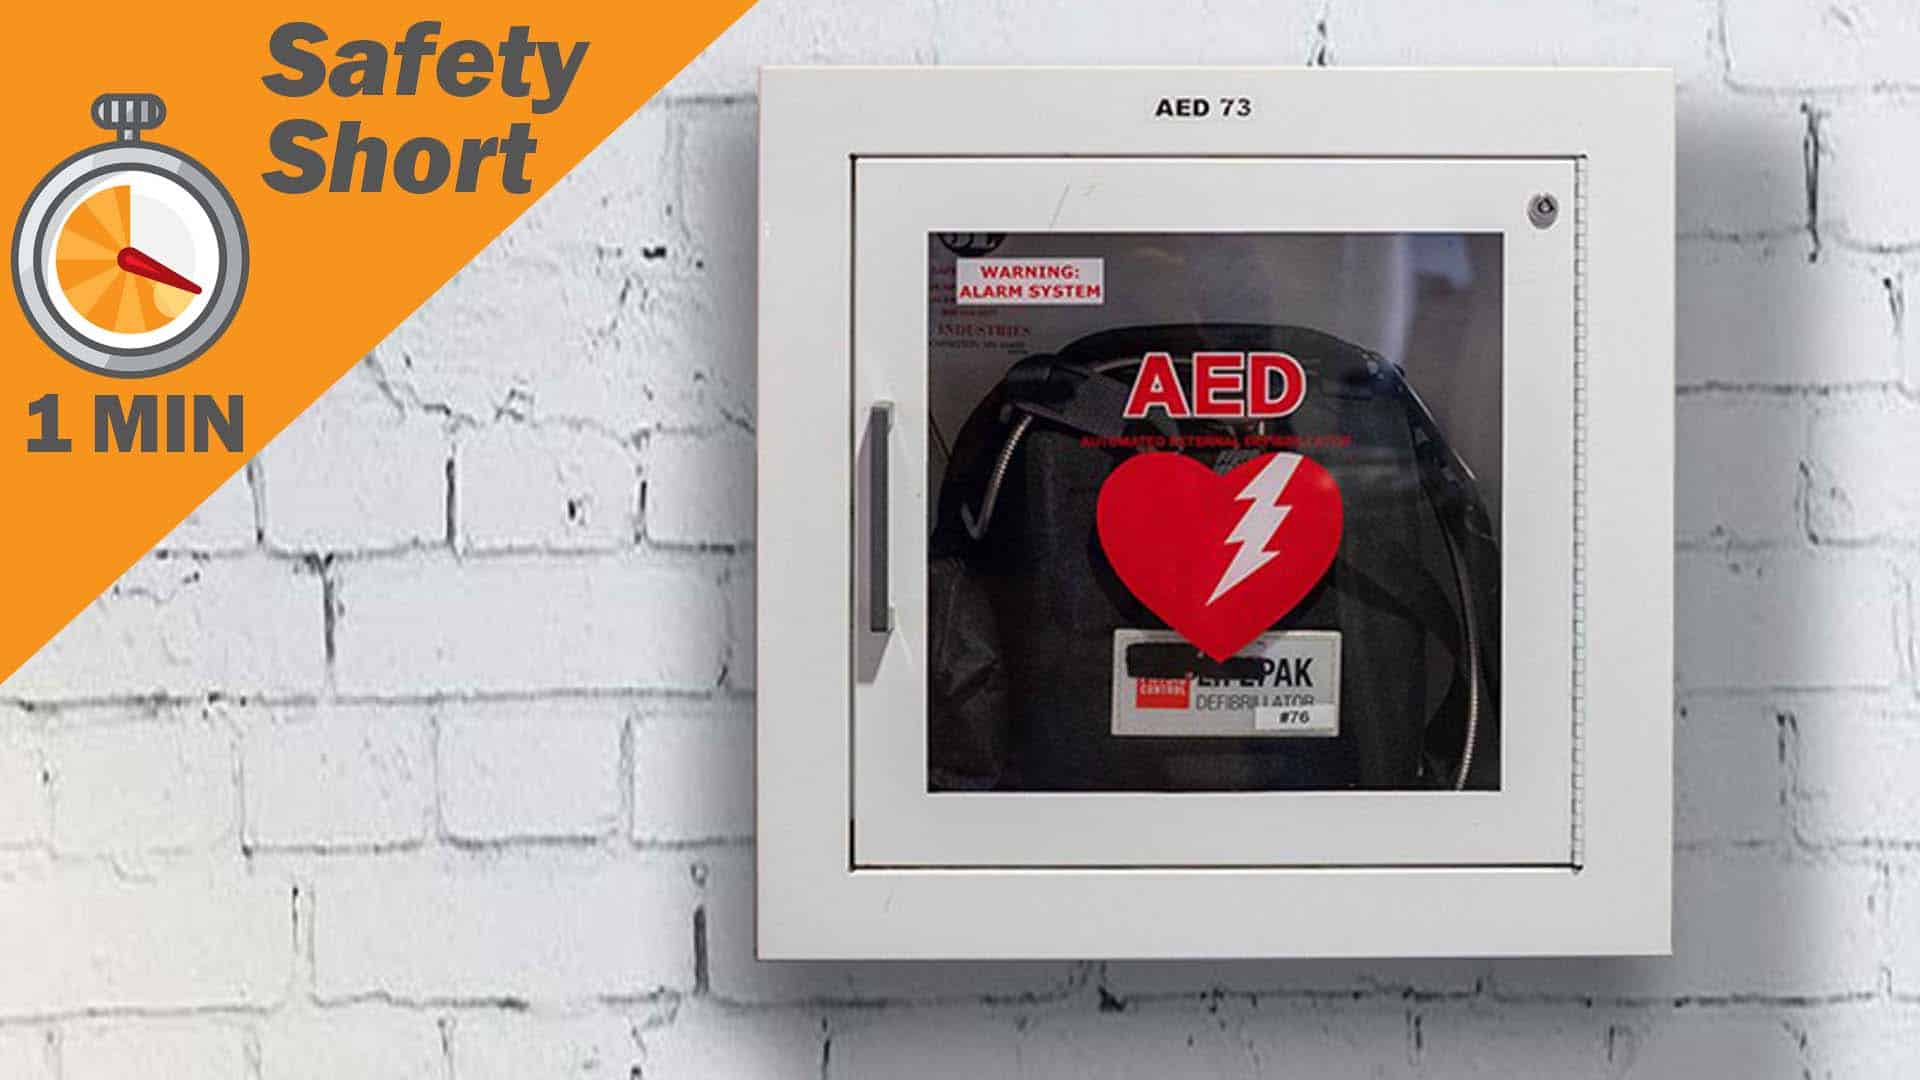 How to Use an Automated External Defibrillator (AED)